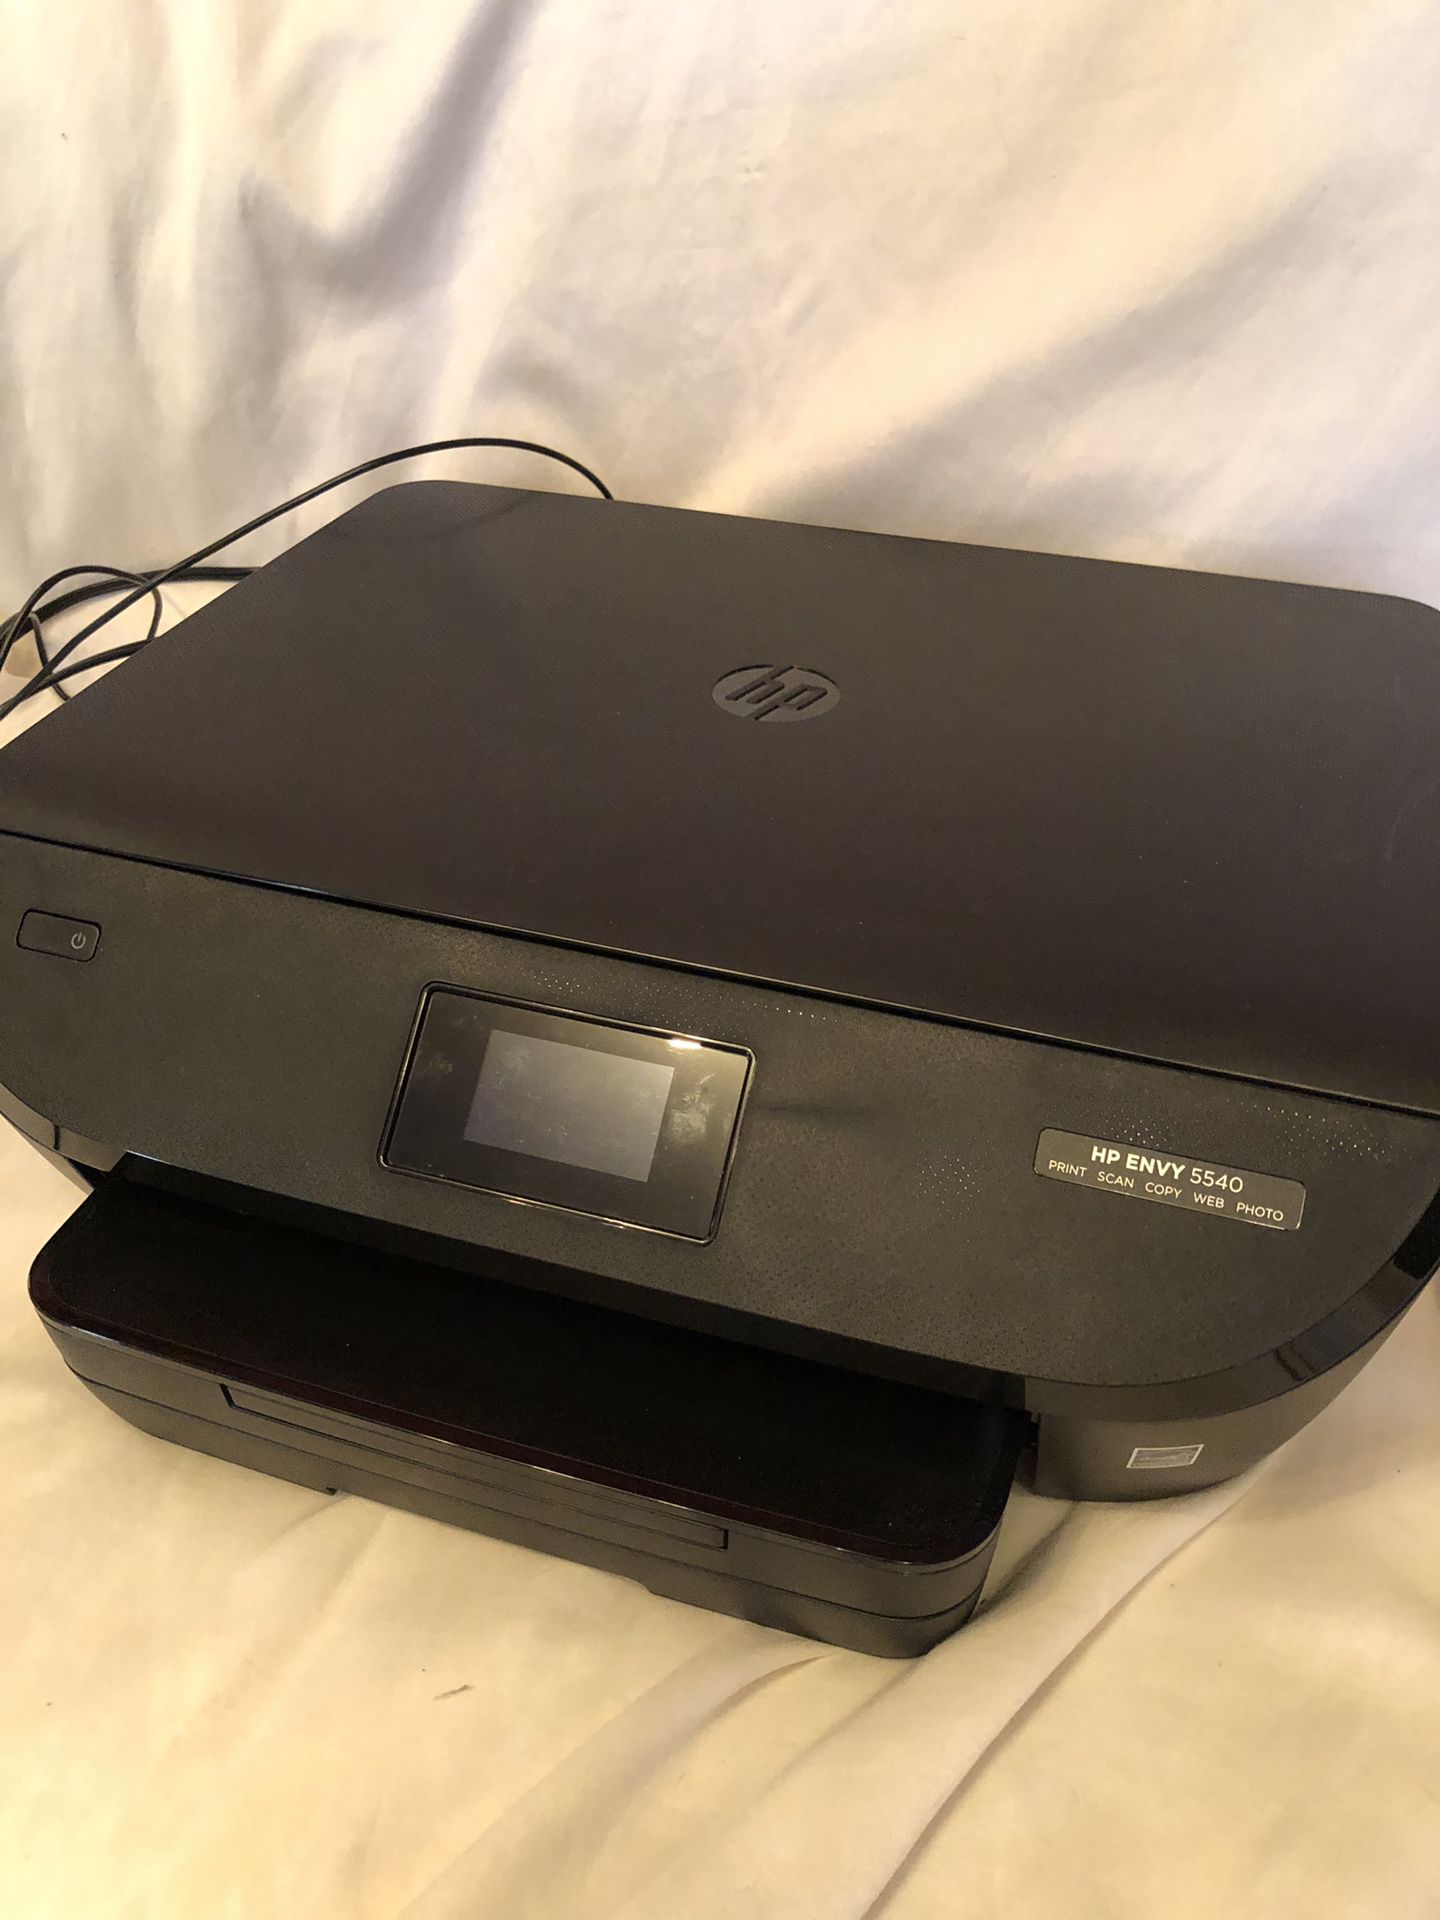 HP Envy 5540 all-in-one printer scanner copier photo